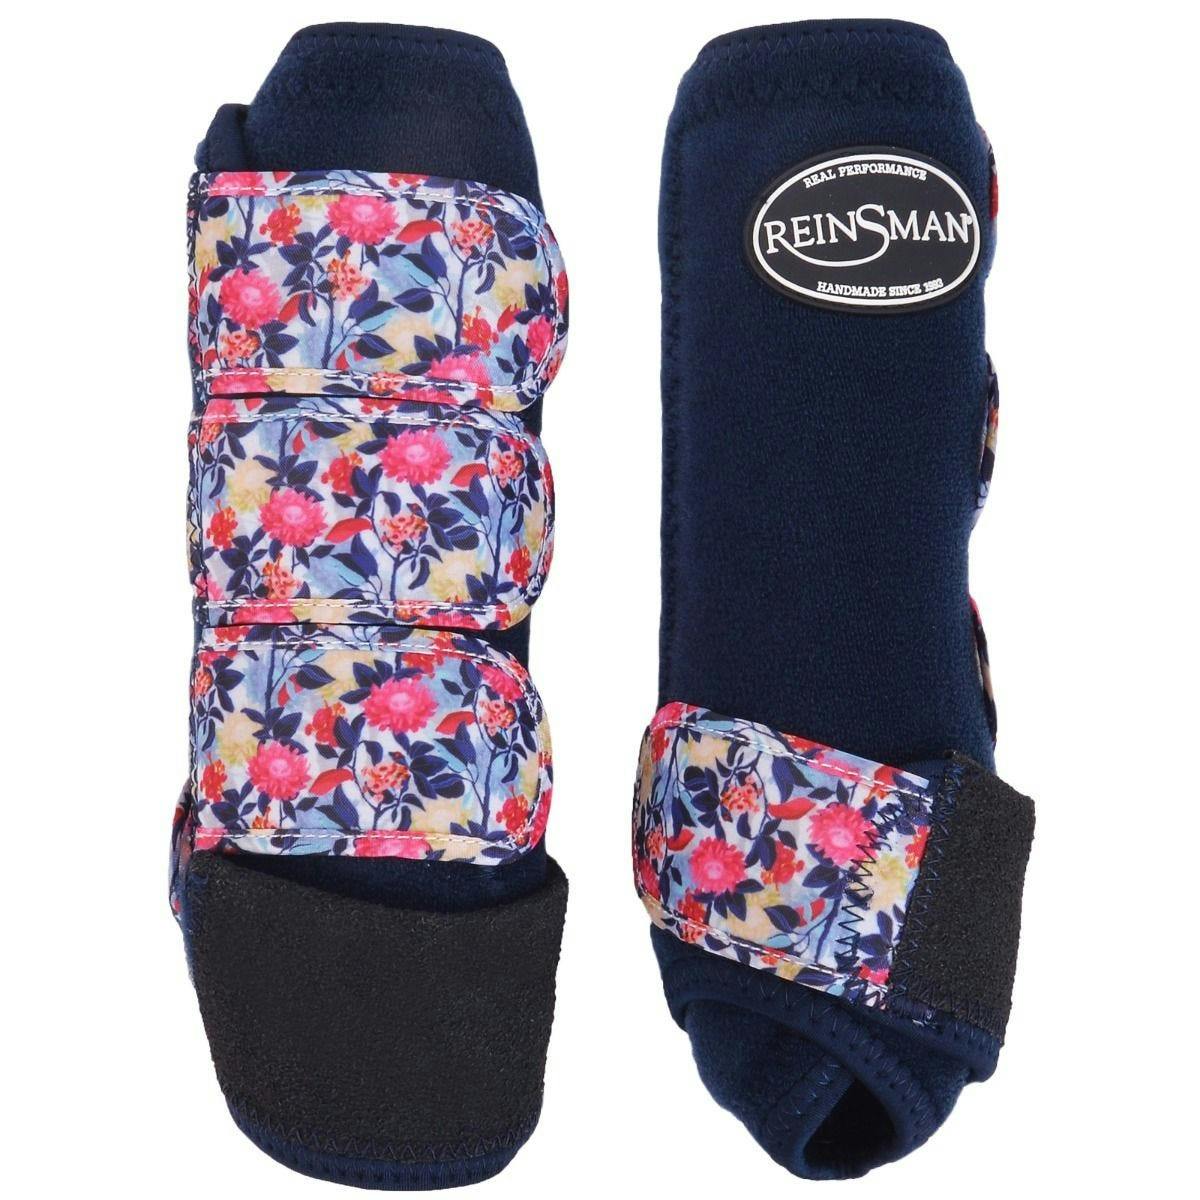 APEX Sport Boots - Navy Floral